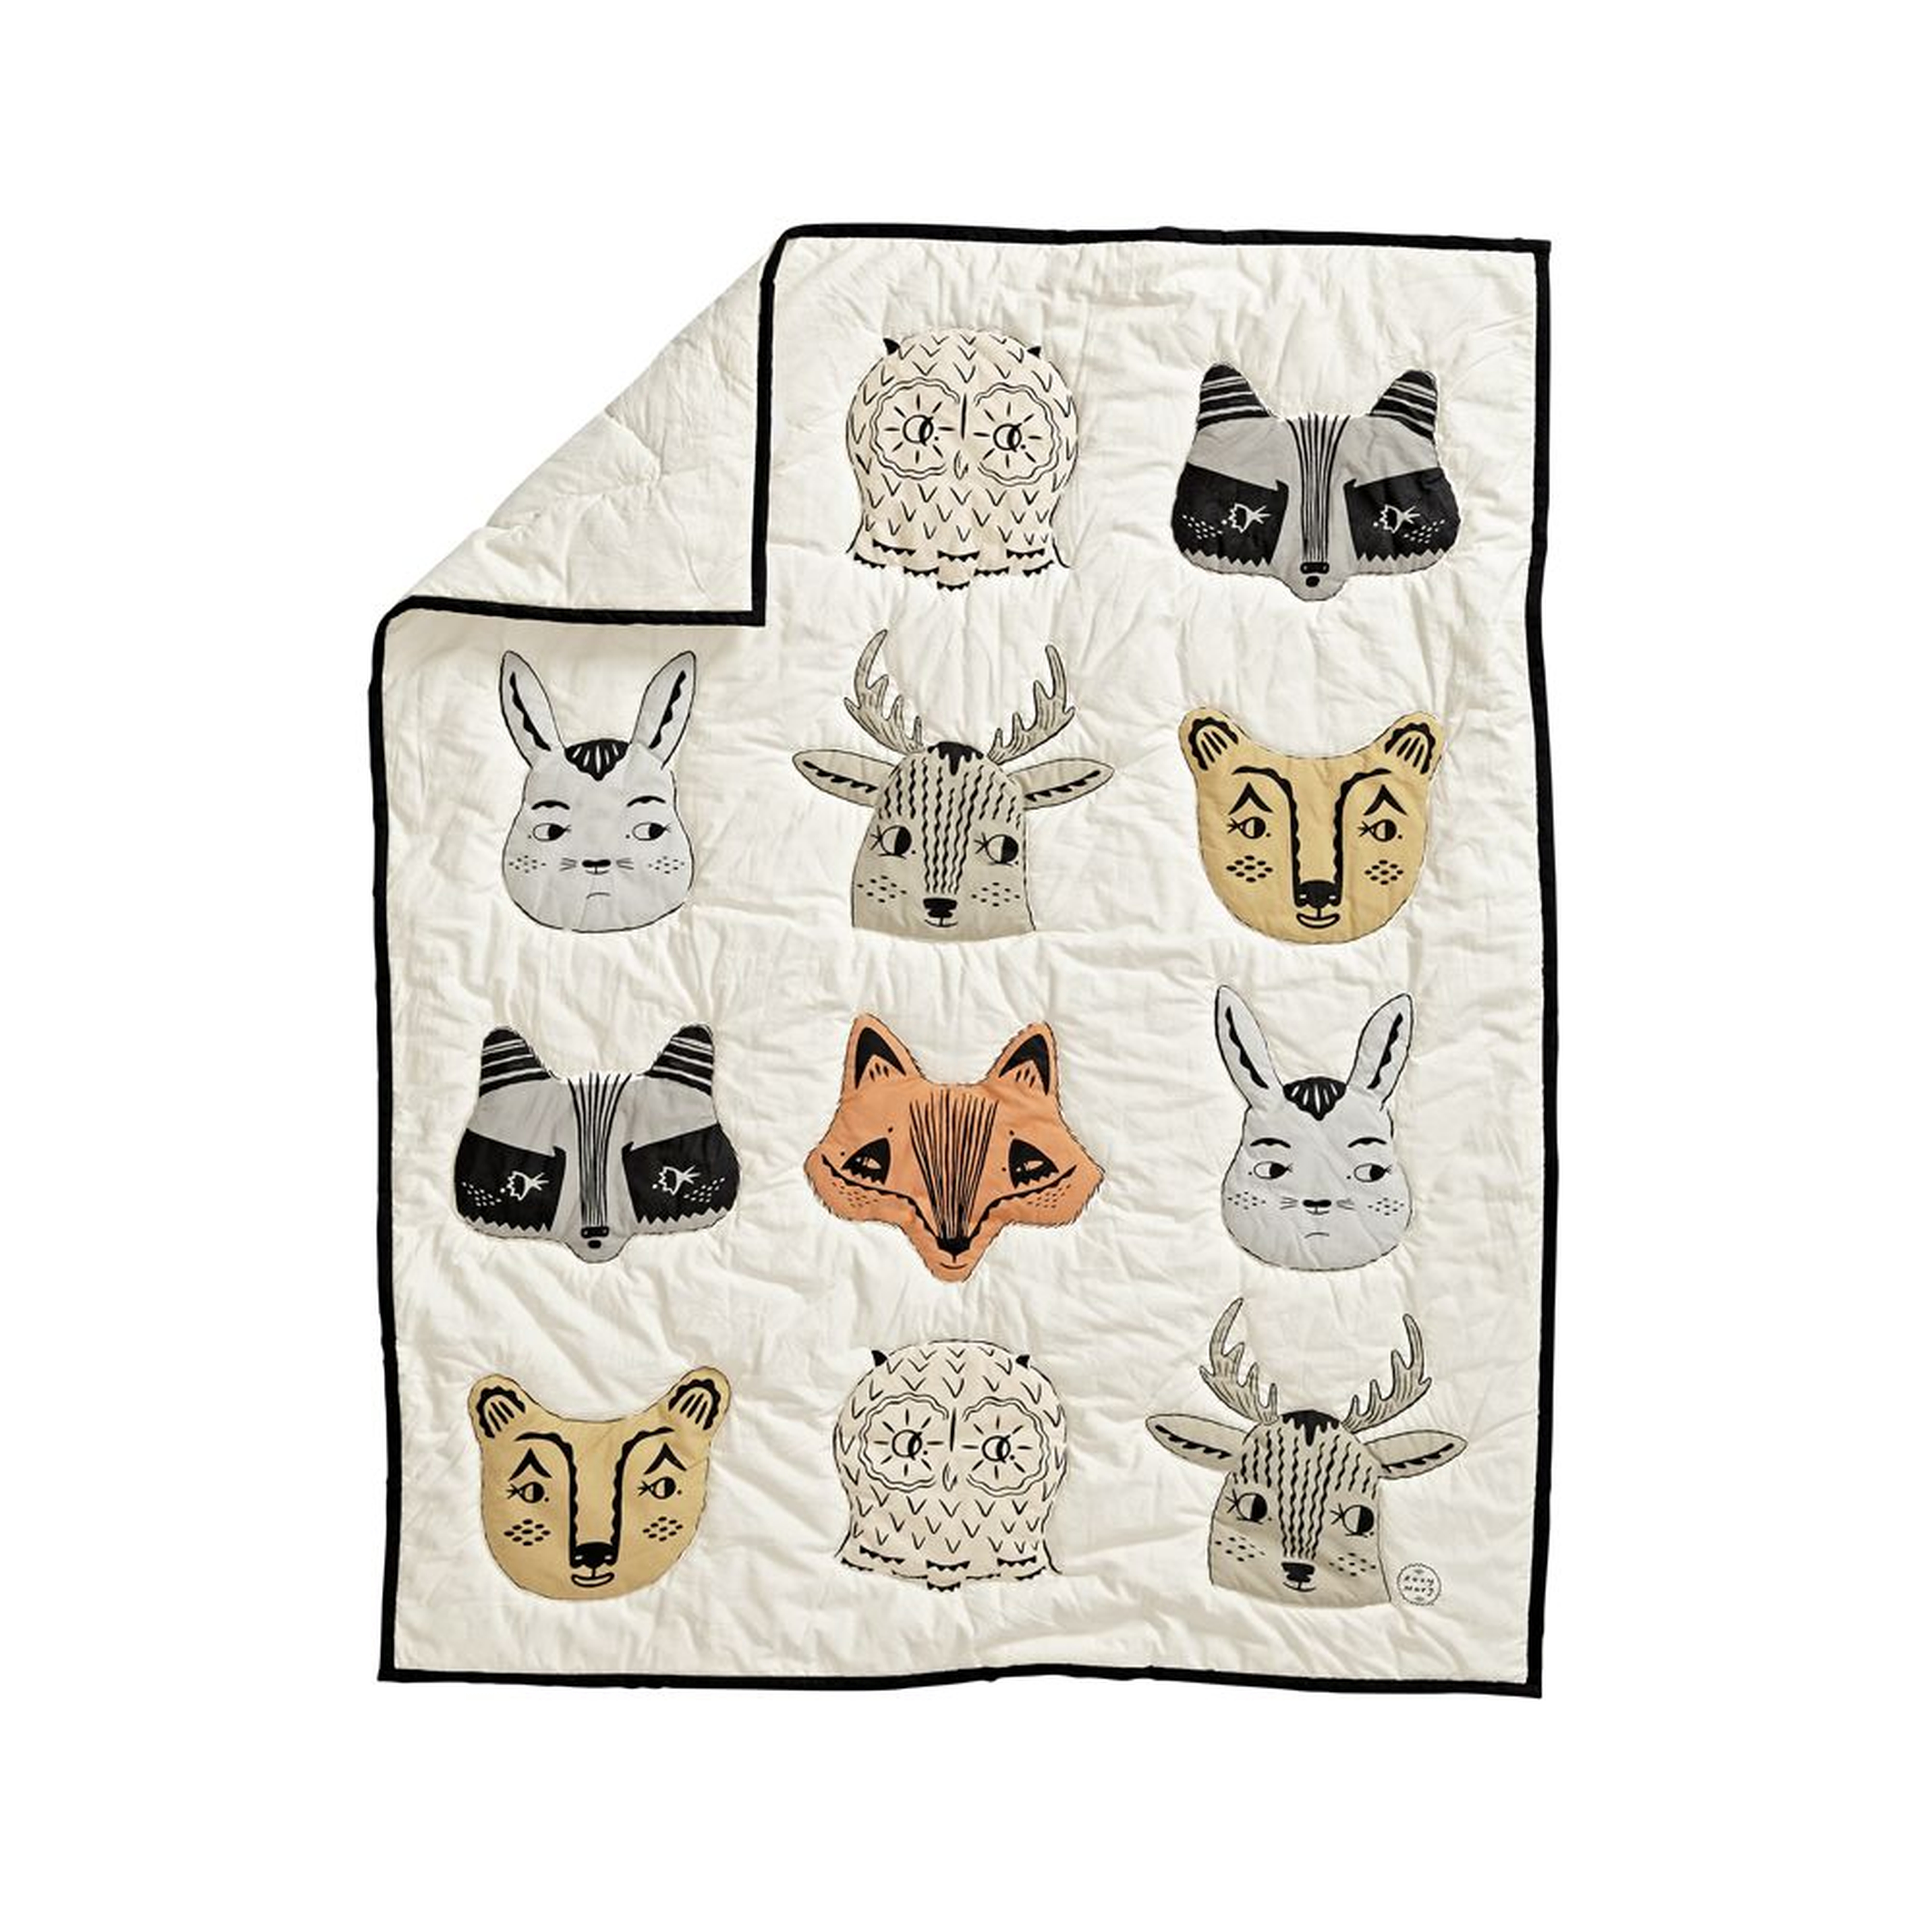 Roxy Marj Woodland Animal Baby Crib Quilt - Crate and Barrel